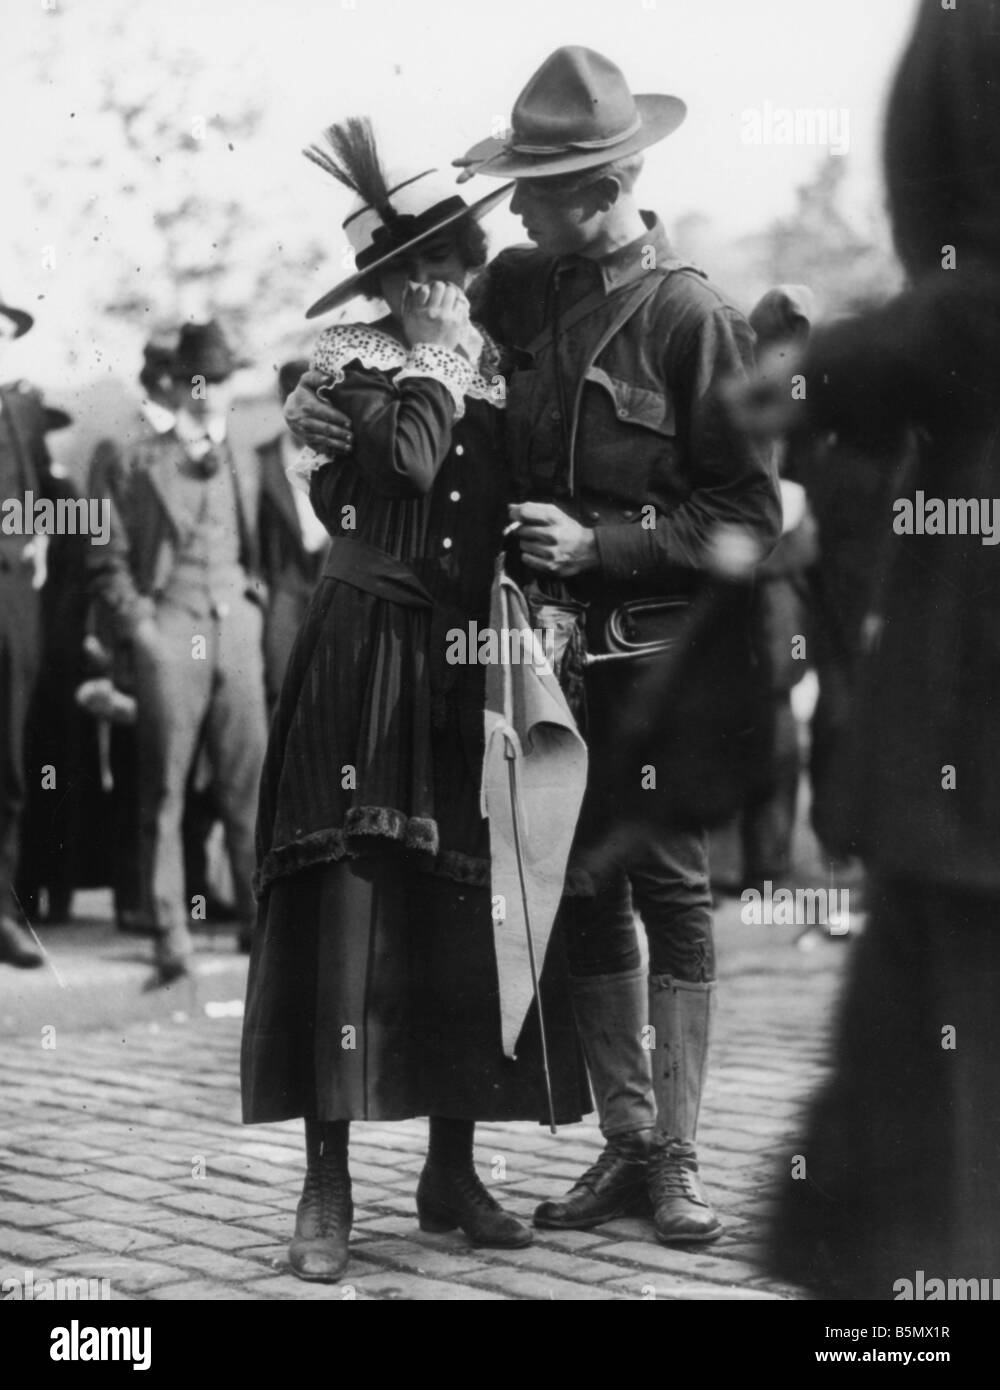 9US 1917 4 6 A1 B War entry 1917 Soldier takes leave World War 1 USA Declaration of War on Germany by the USA 6th April 1917 Sol Stock Photo